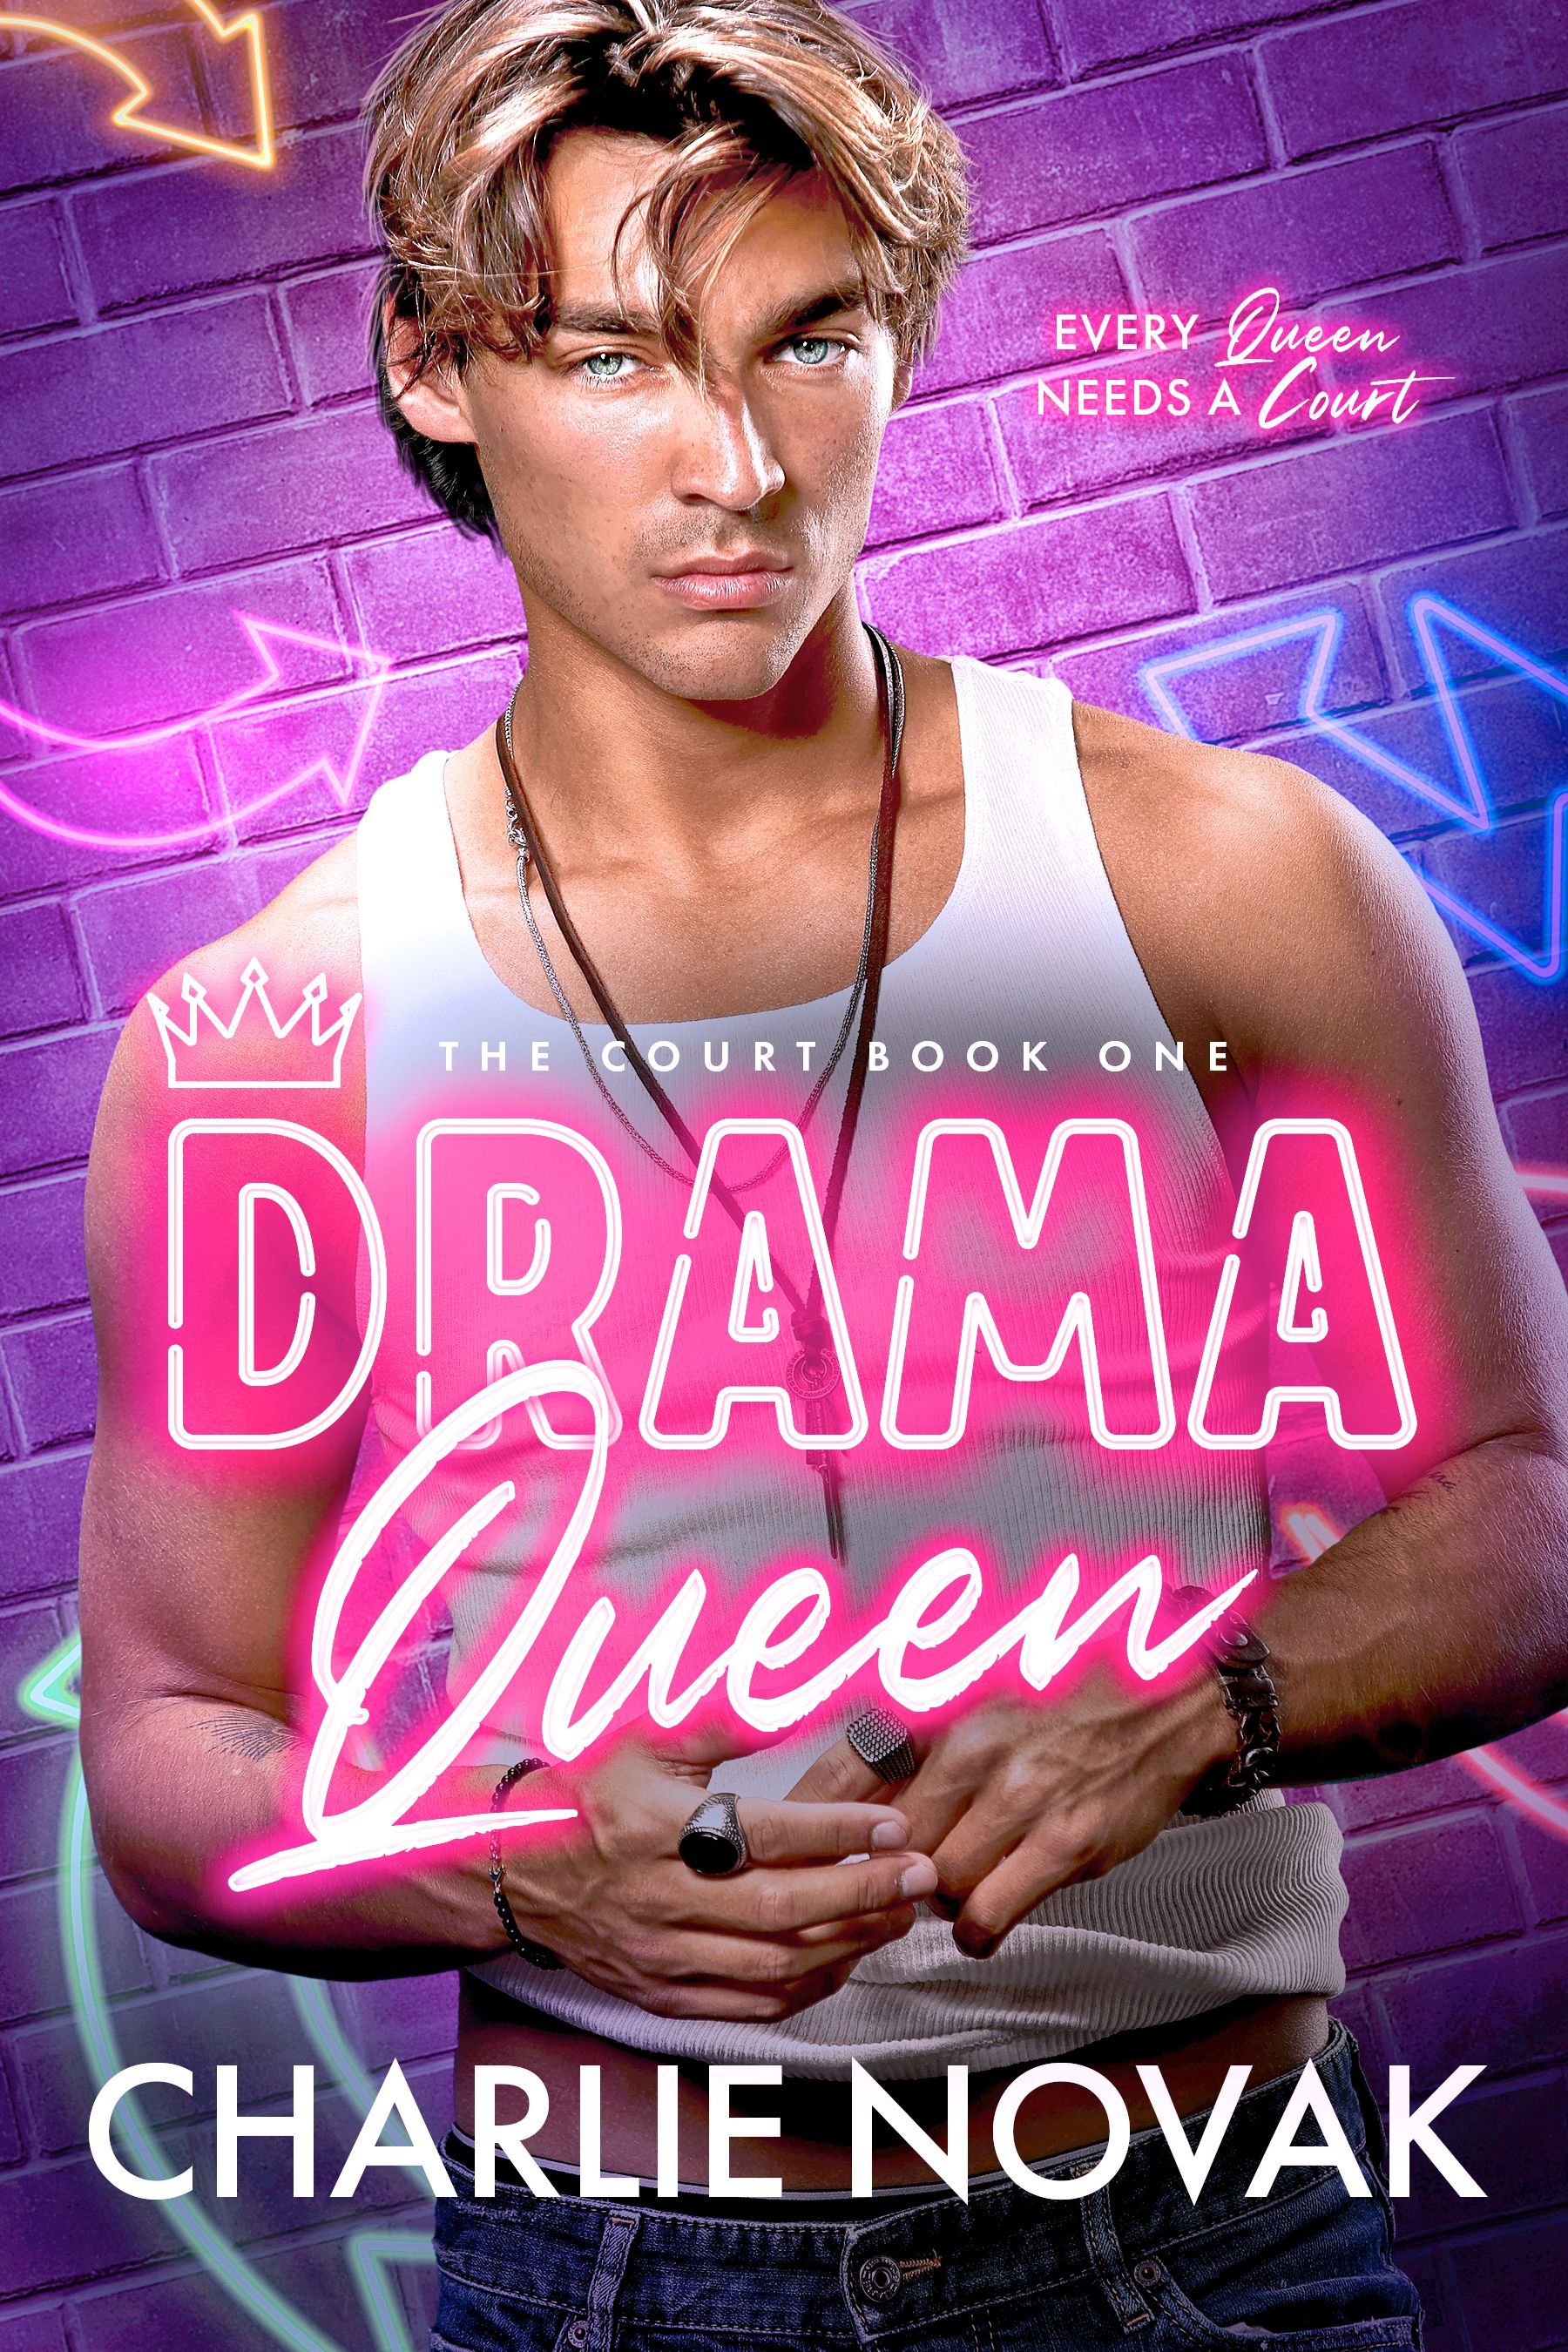 The cover of the book drama queen by charlie novak shows a man standing in front of a brick wall.